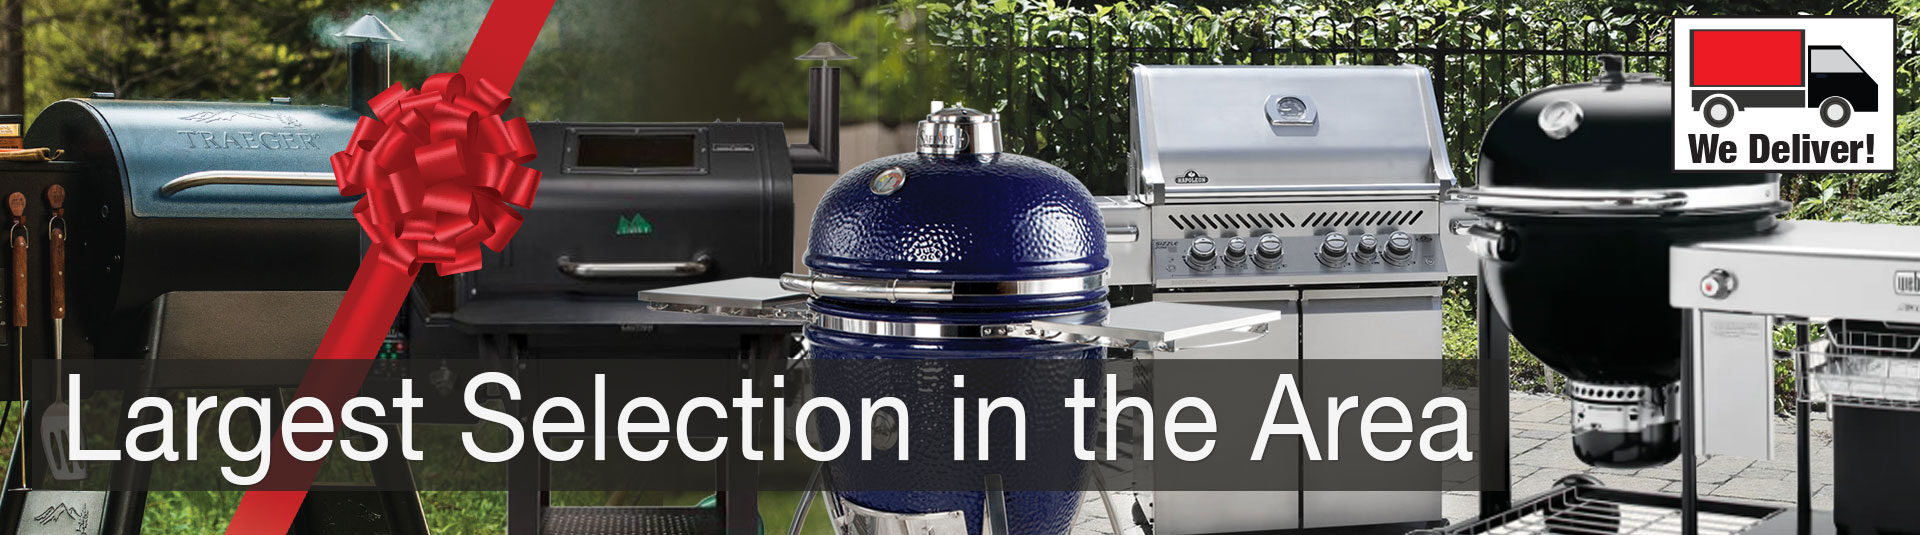 BBQ Grills & Accessories for Christmas at Benson Stone Company